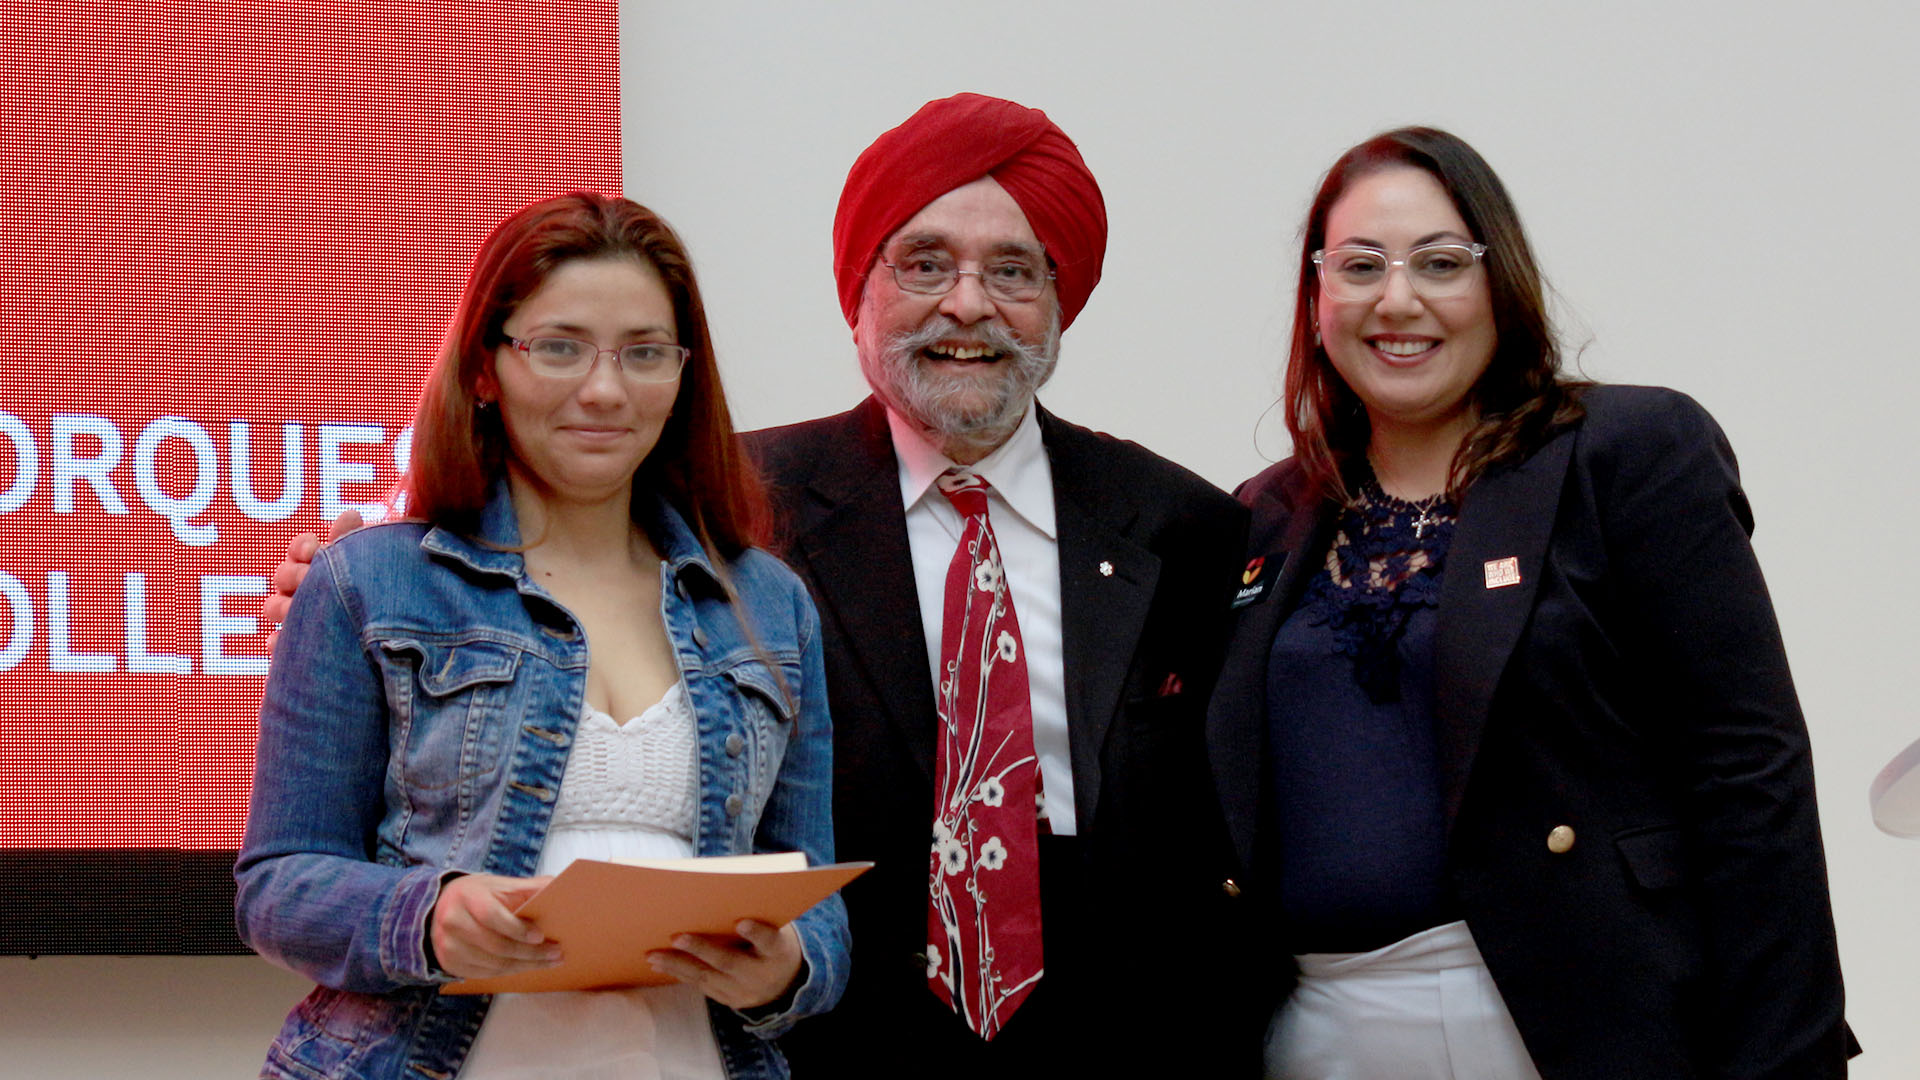 New Canadians celebrated at NorQuest